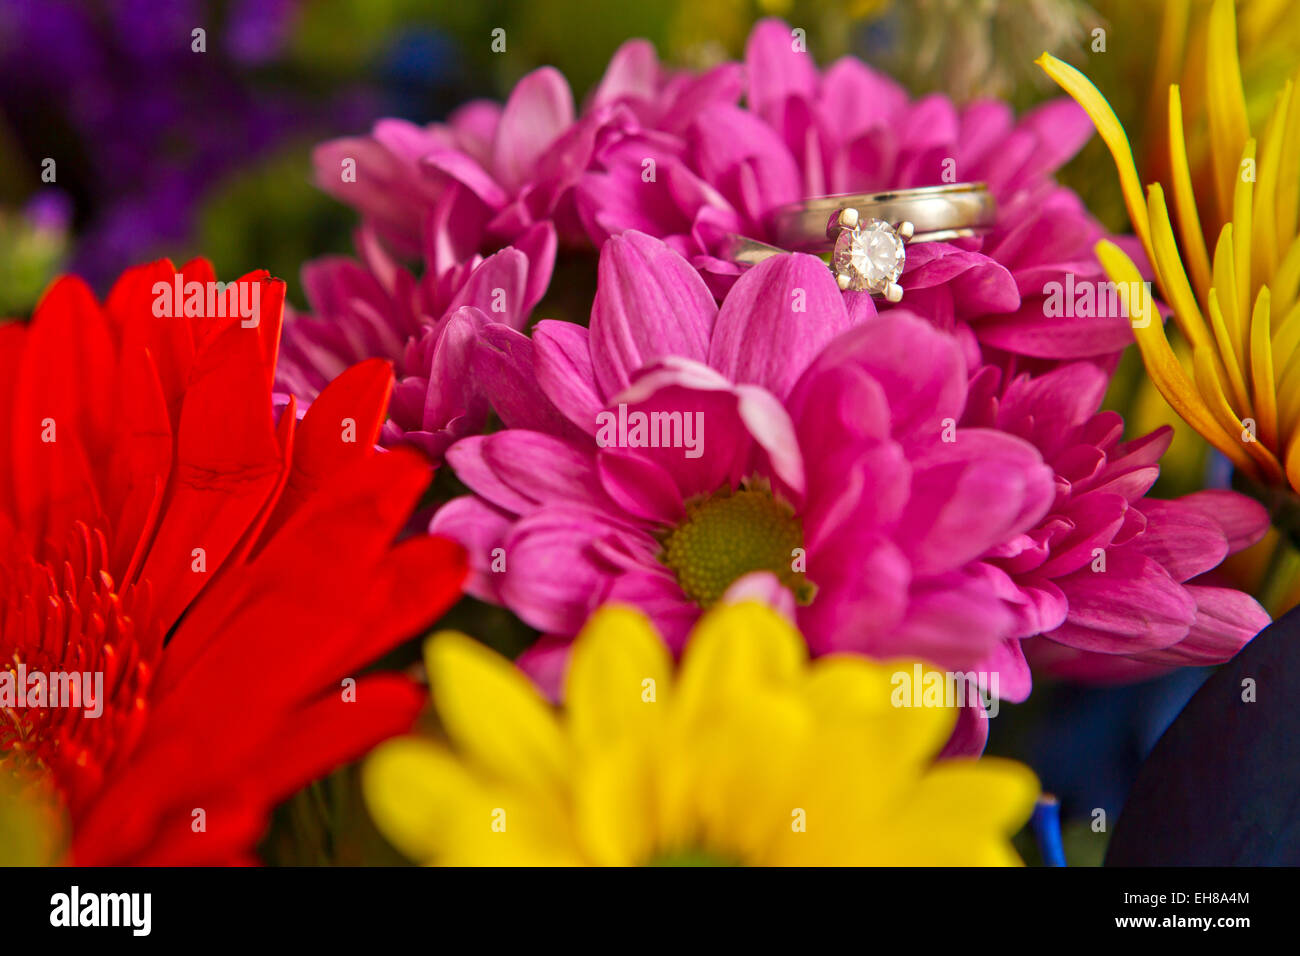 wedding rings resting on pretty pink flowers Stock Photo